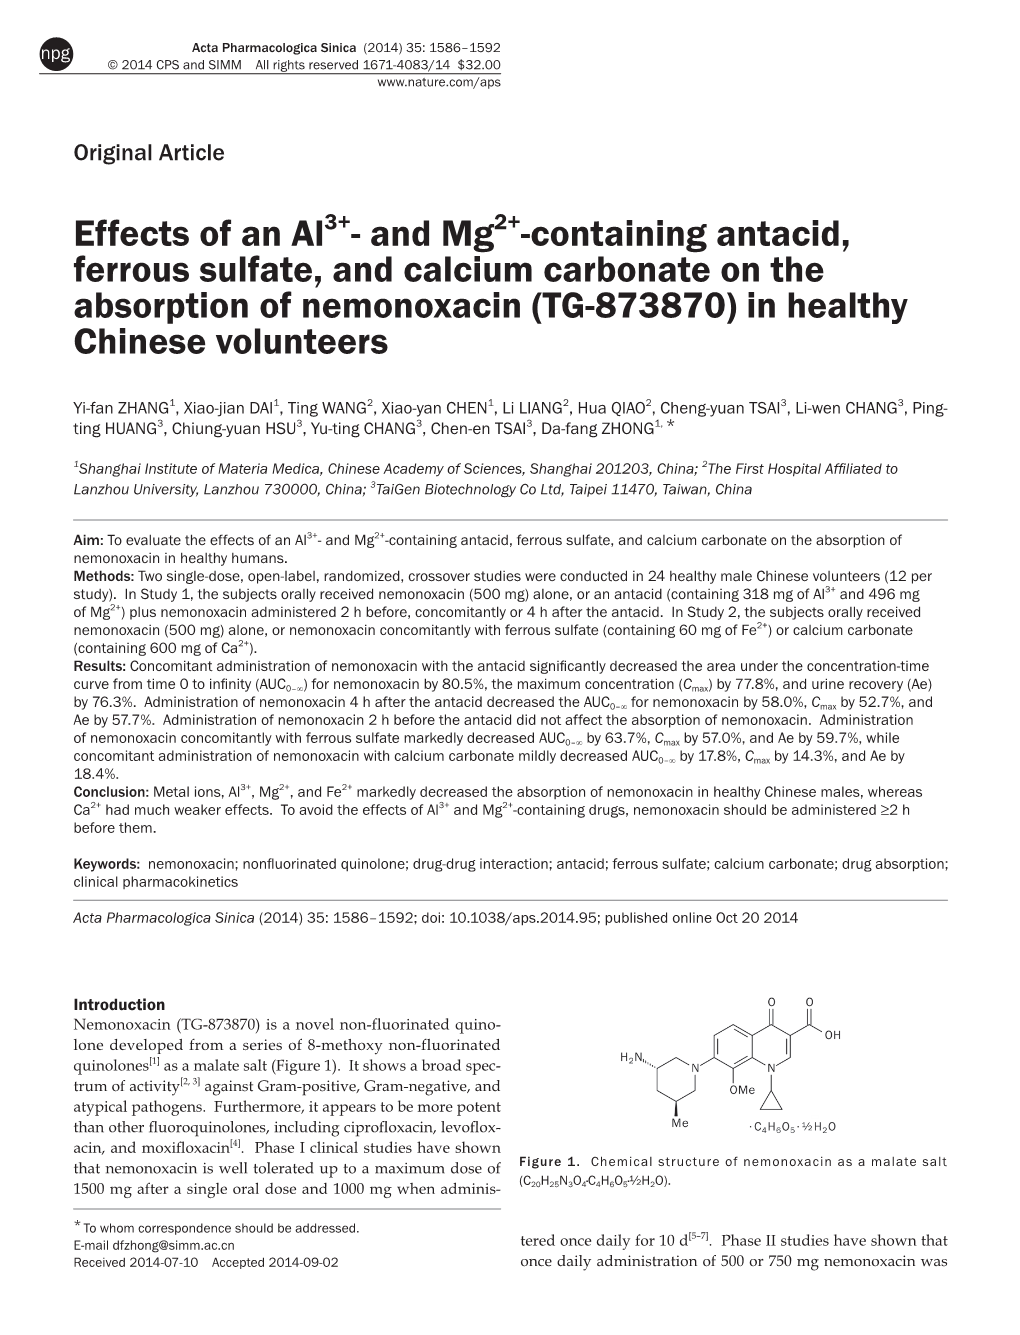 Effects of an Al3+- and Mg2+-Containing Antacid, Ferrous Sulfate, and Calcium Carbonate on the Absorption of Nemonoxacin (TG-873870) in Healthy Chinese Volunteers